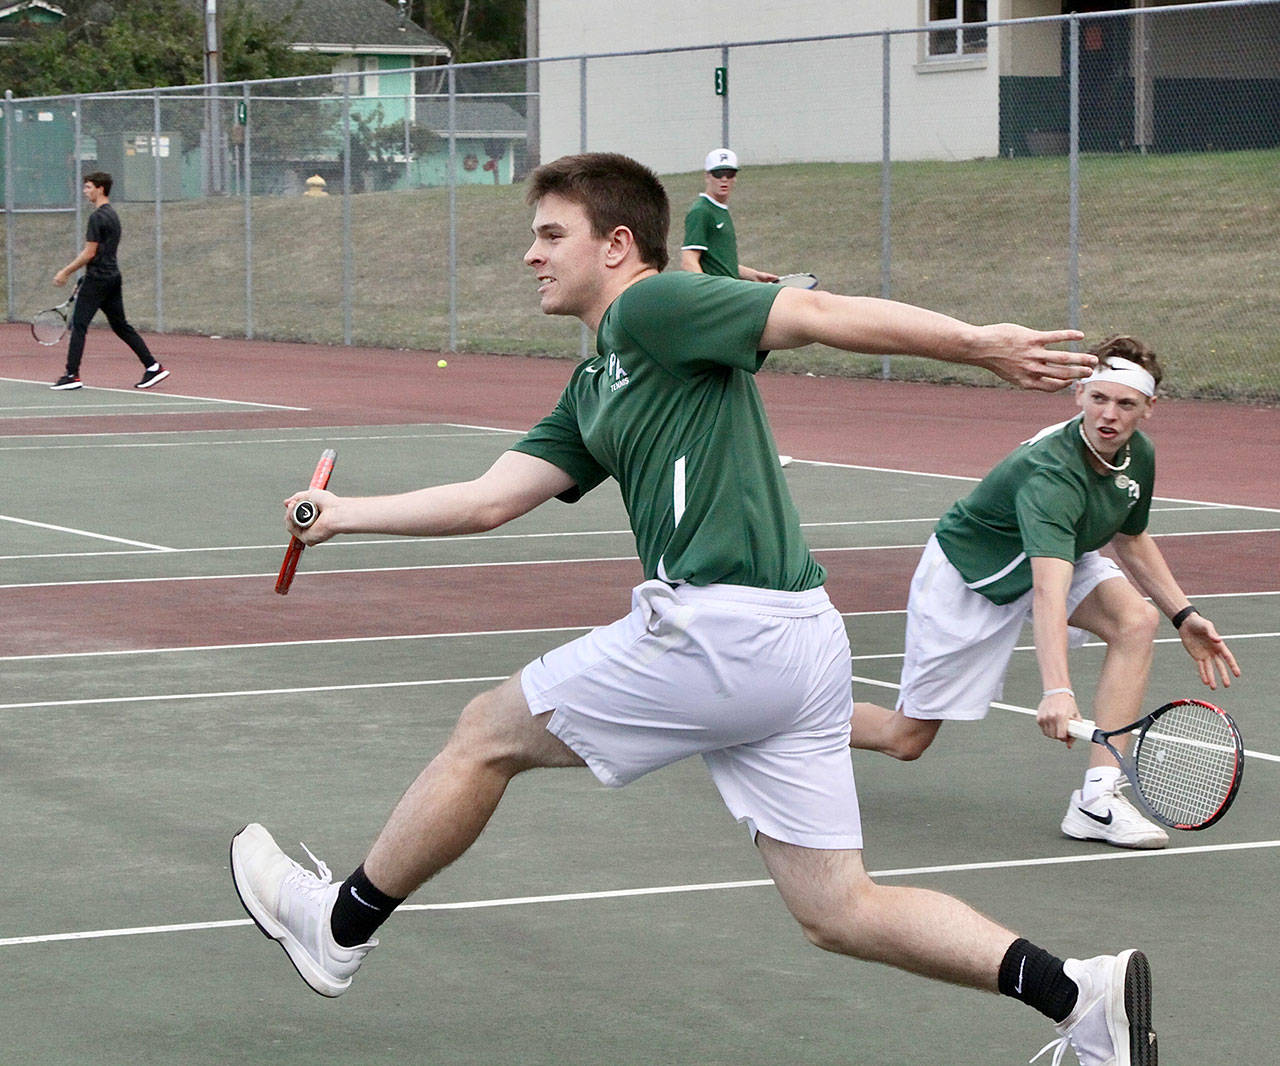 Dave Logan/for Peninsula Daily News The Port Angeles boys tennis doubles duo of Milo Whitman, front, and Dru Clark competed in a rain-shortened match against Klahowya on Monday.